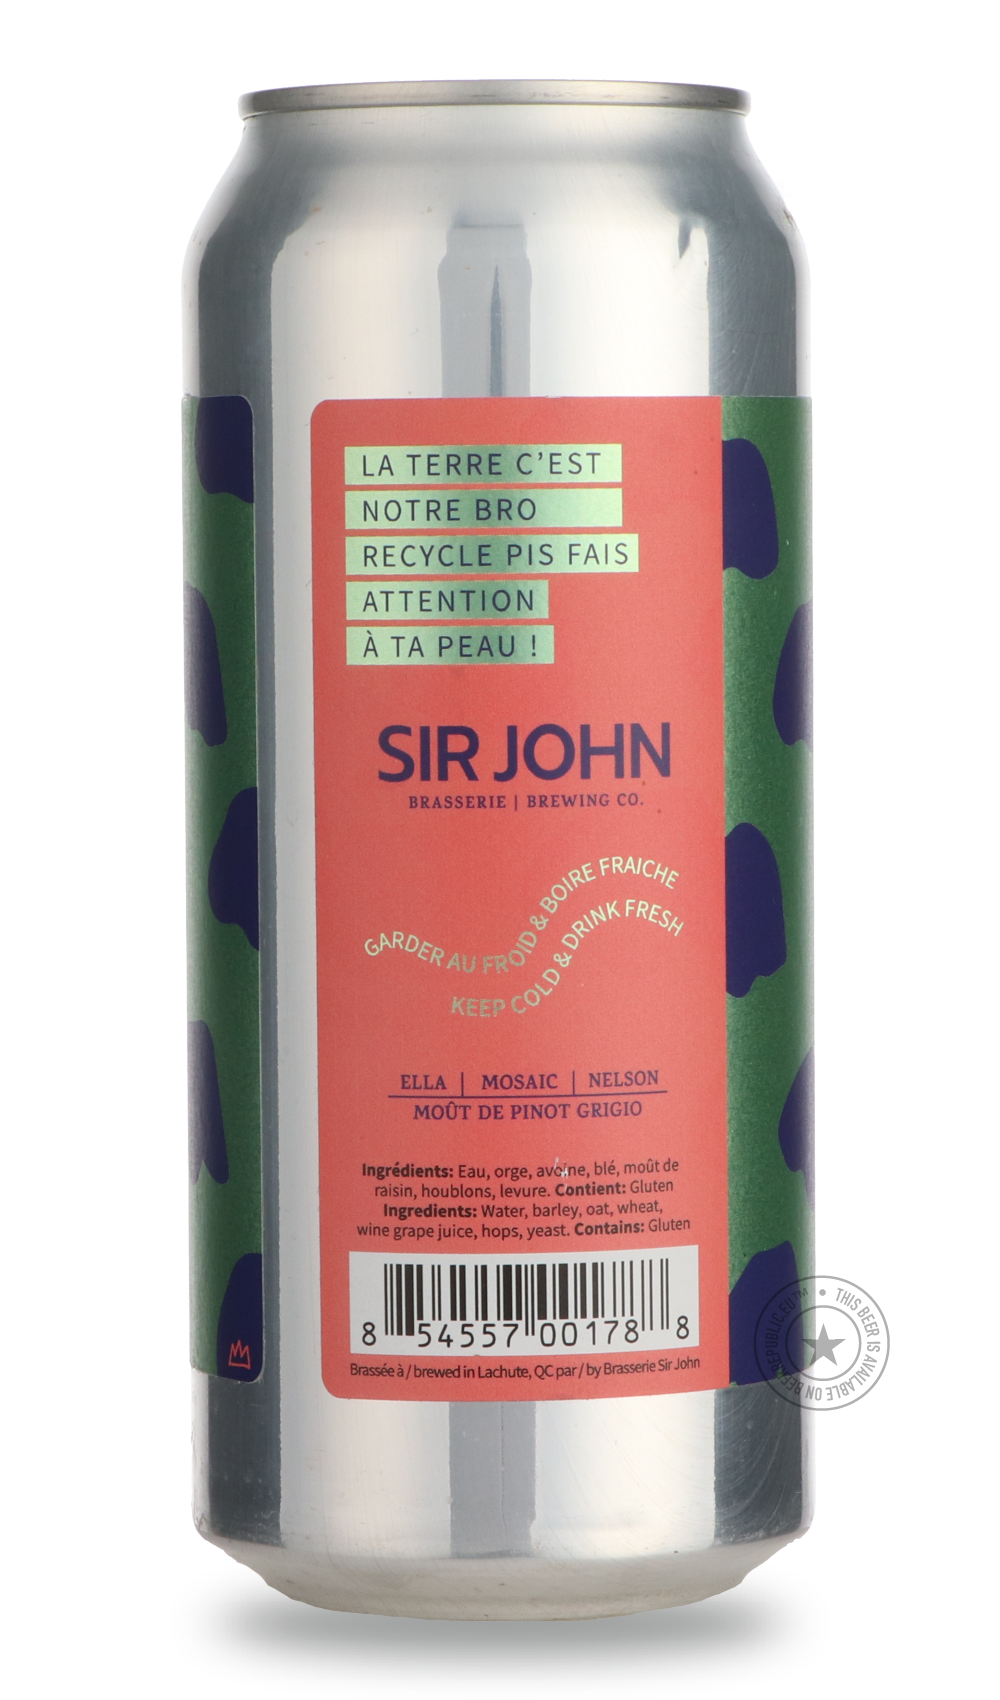 -Sir John- Weird Dreams [Pinot Grigio]-IPA- Only @ Beer Republic - The best online beer store for American & Canadian craft beer - Buy beer online from the USA and Canada - Bier online kopen - Amerikaans bier kopen - Craft beer store - Craft beer kopen - Amerikanisch bier kaufen - Bier online kaufen - Acheter biere online - IPA - Stout - Porter - New England IPA - Hazy IPA - Imperial Stout - Barrel Aged - Barrel Aged Imperial Stout - Brown - Dark beer - Blond - Blonde - Pilsner - Lager - Wheat - Weizen - Am